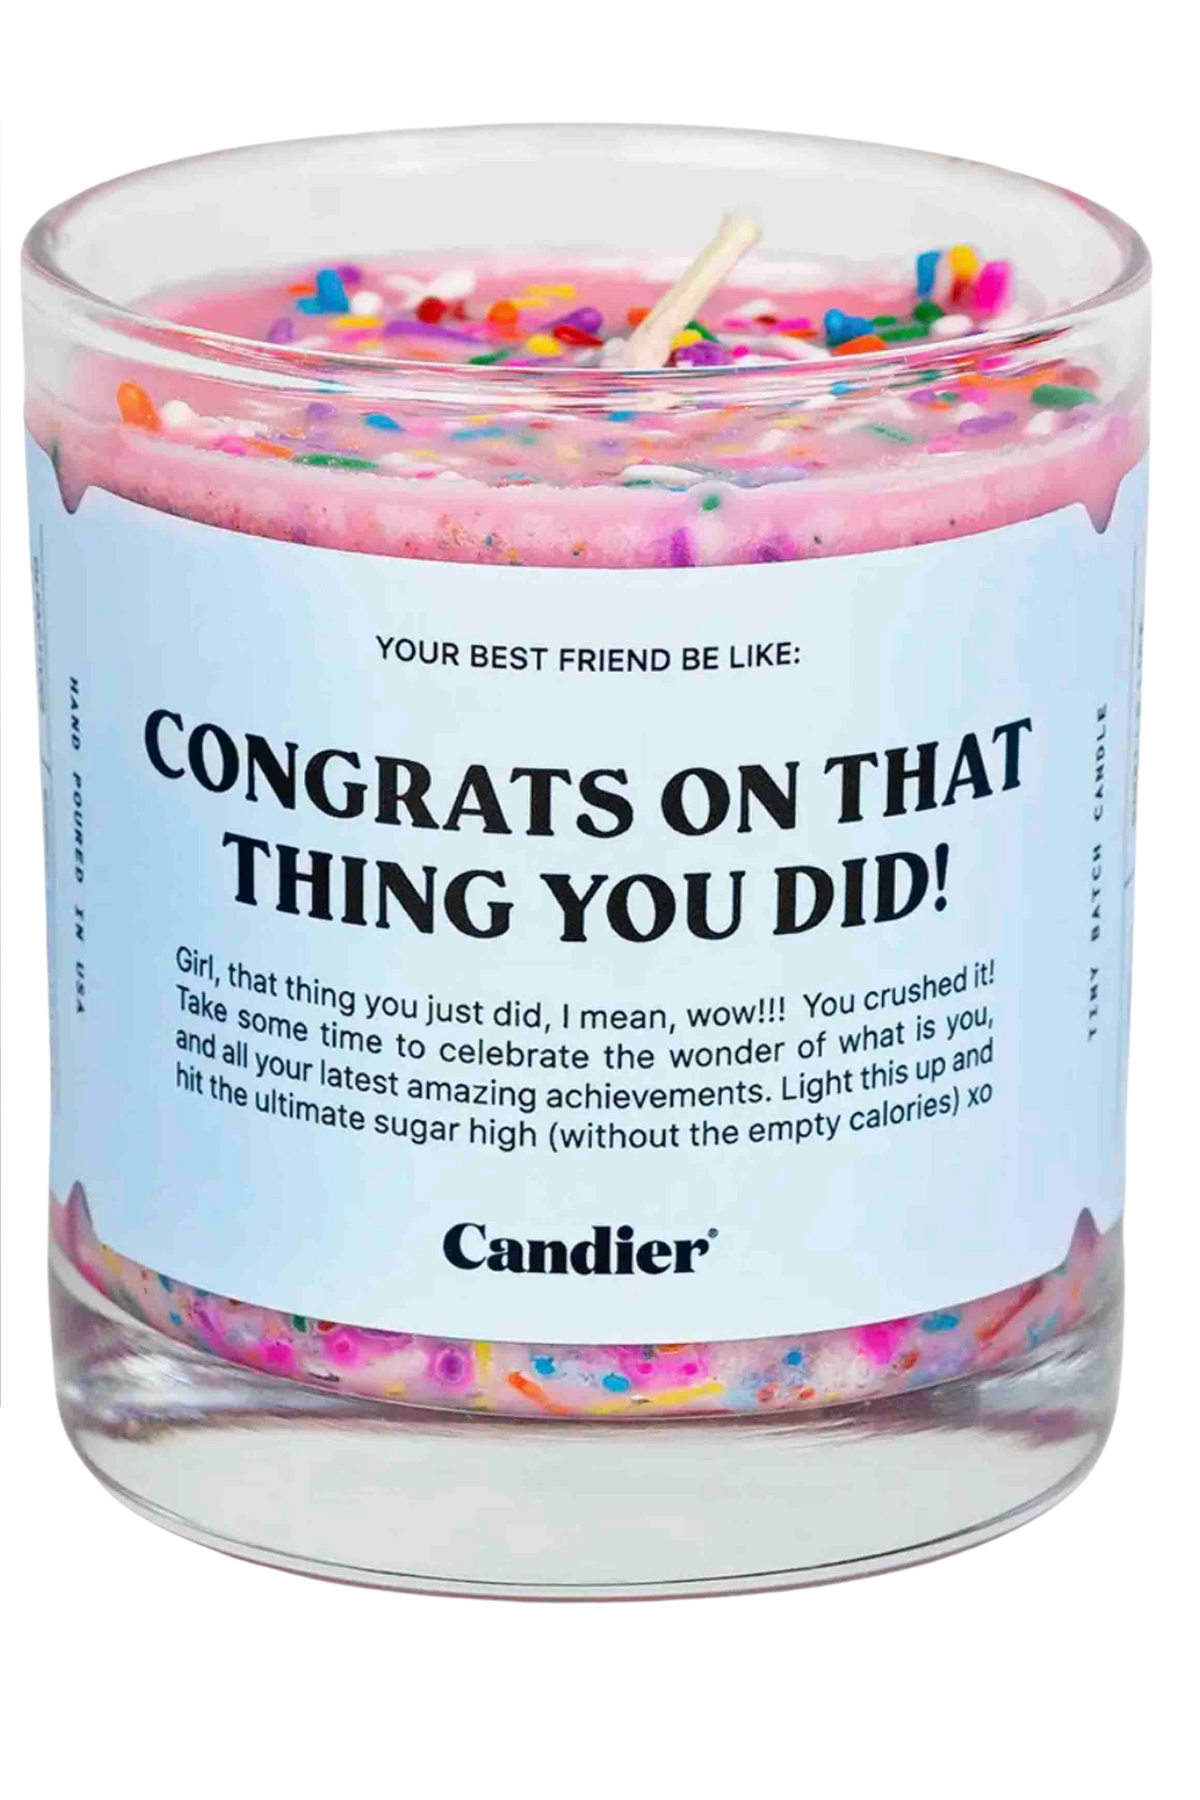 Congrats on That Thing You Did Candle by Ryan Porter/Candier